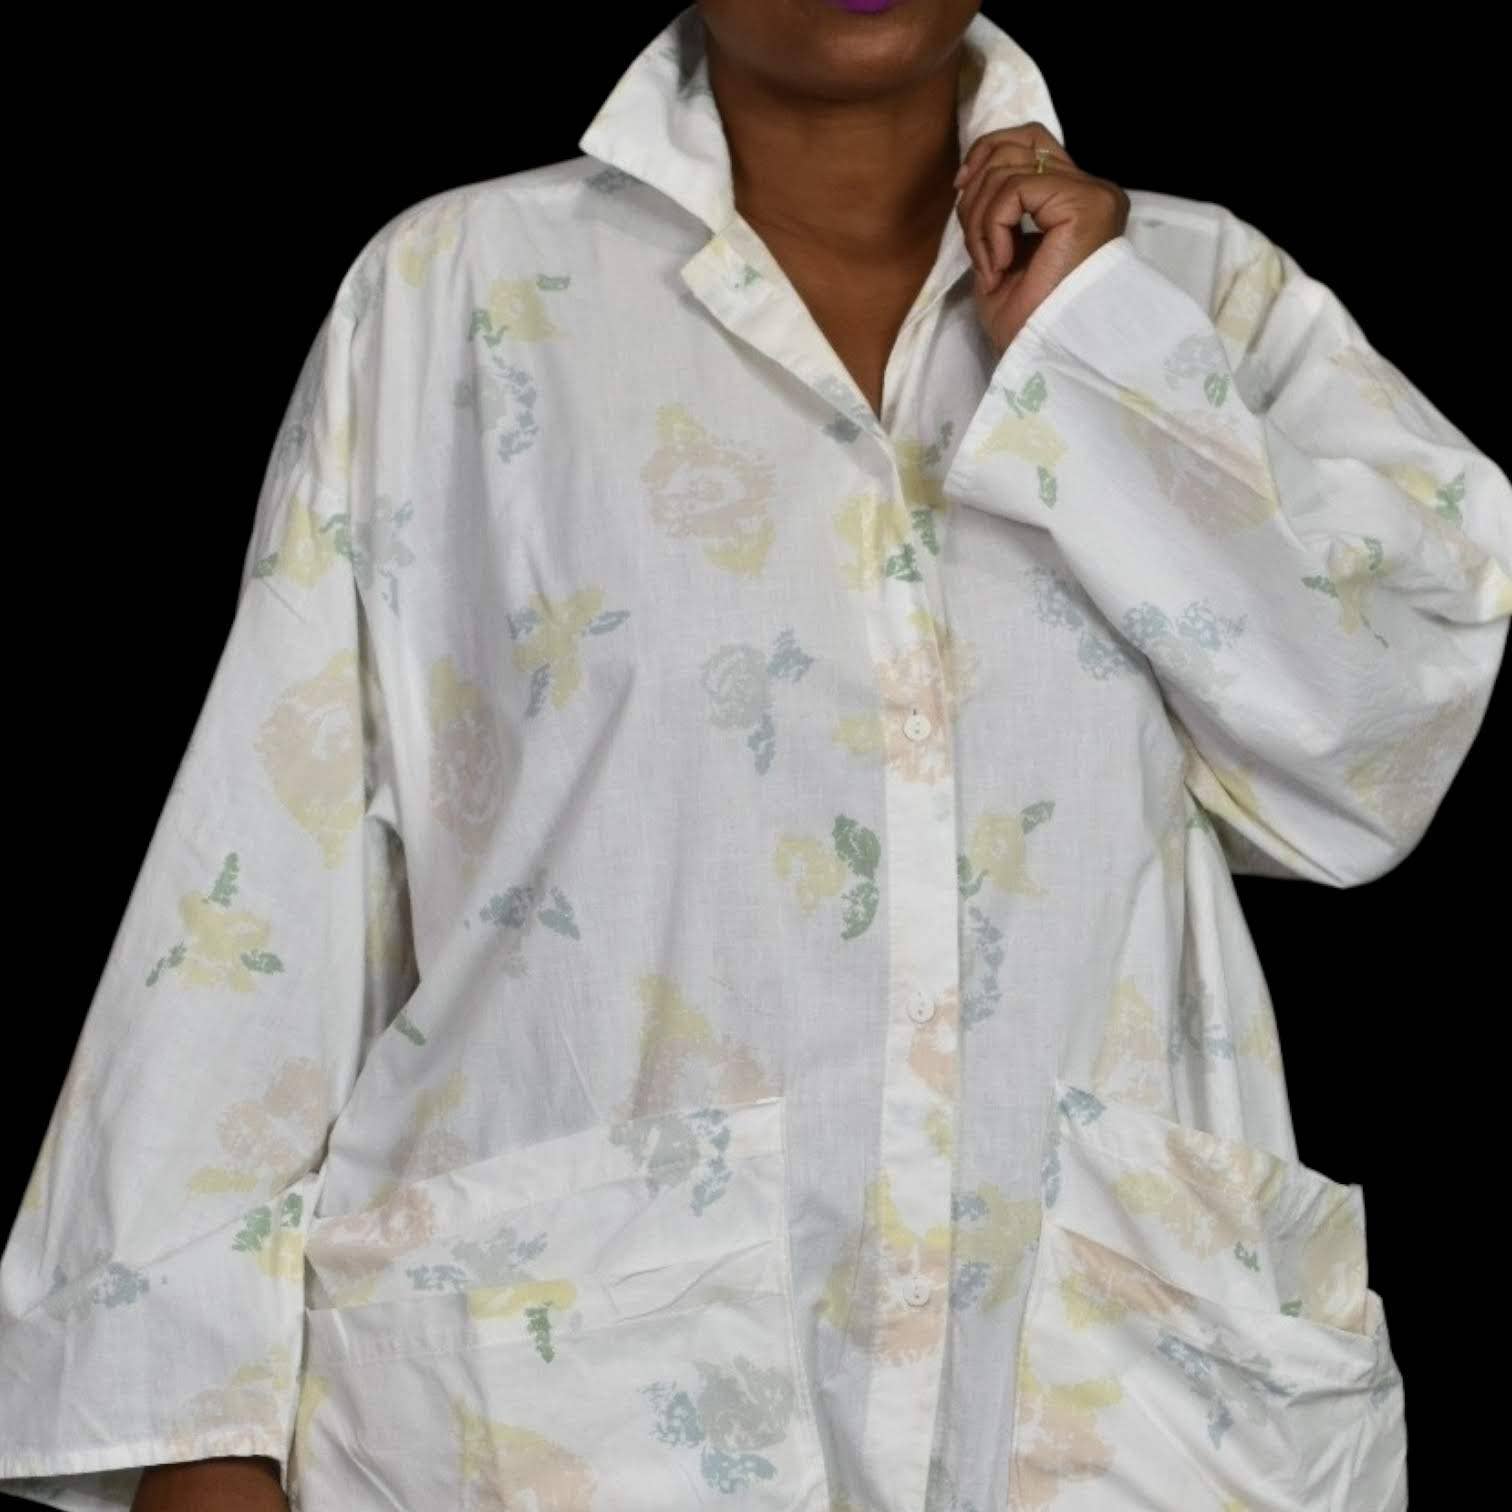 Vintage Floral Button Front Dress White Homemade Cotton Oversized Shirtdress One Size